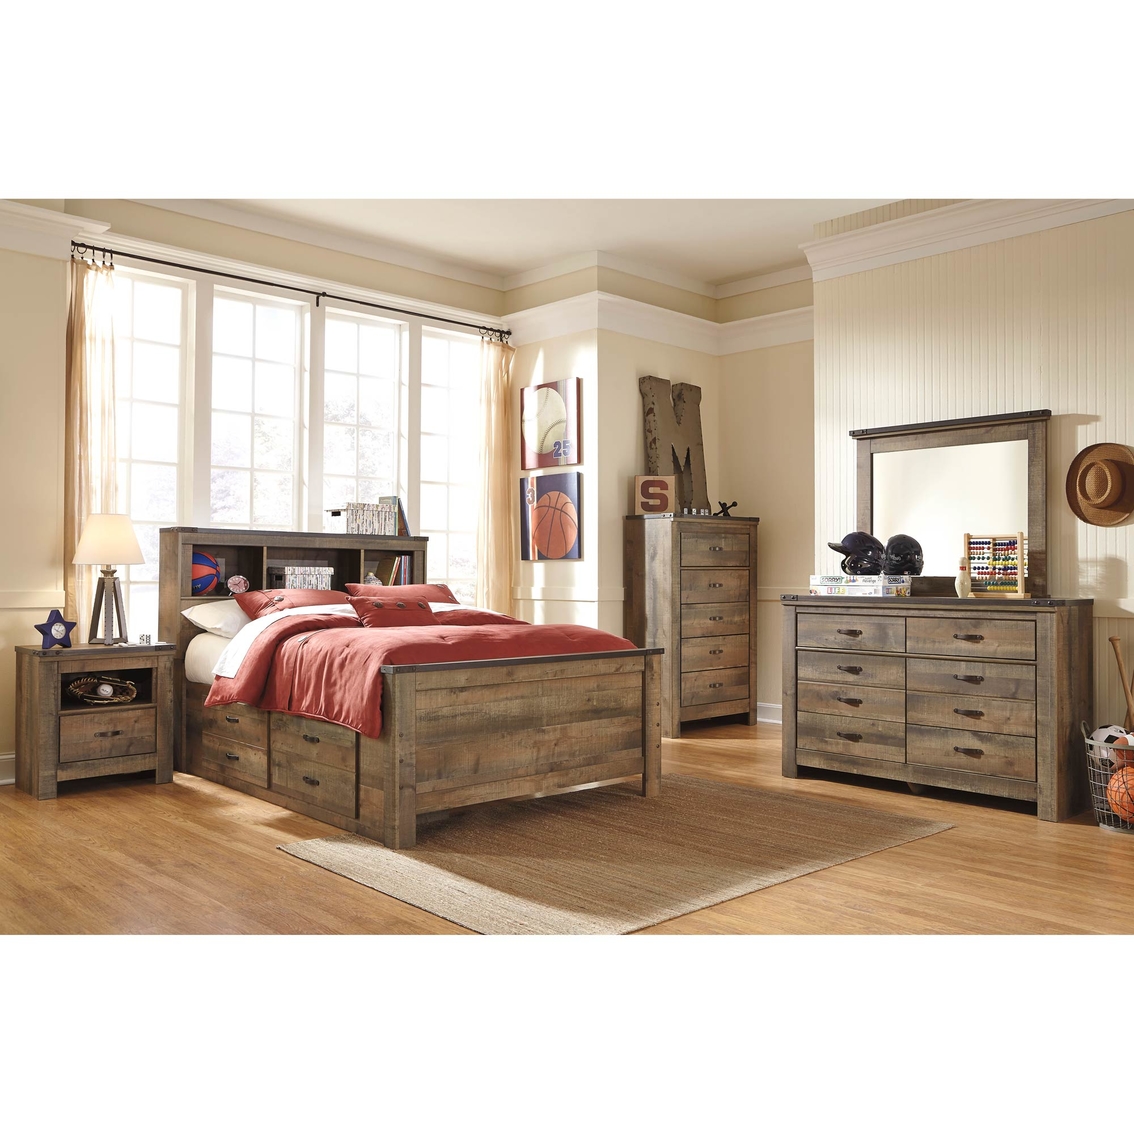 Ashley Trinell Full Bookcase Bed with Storage - Image 2 of 5